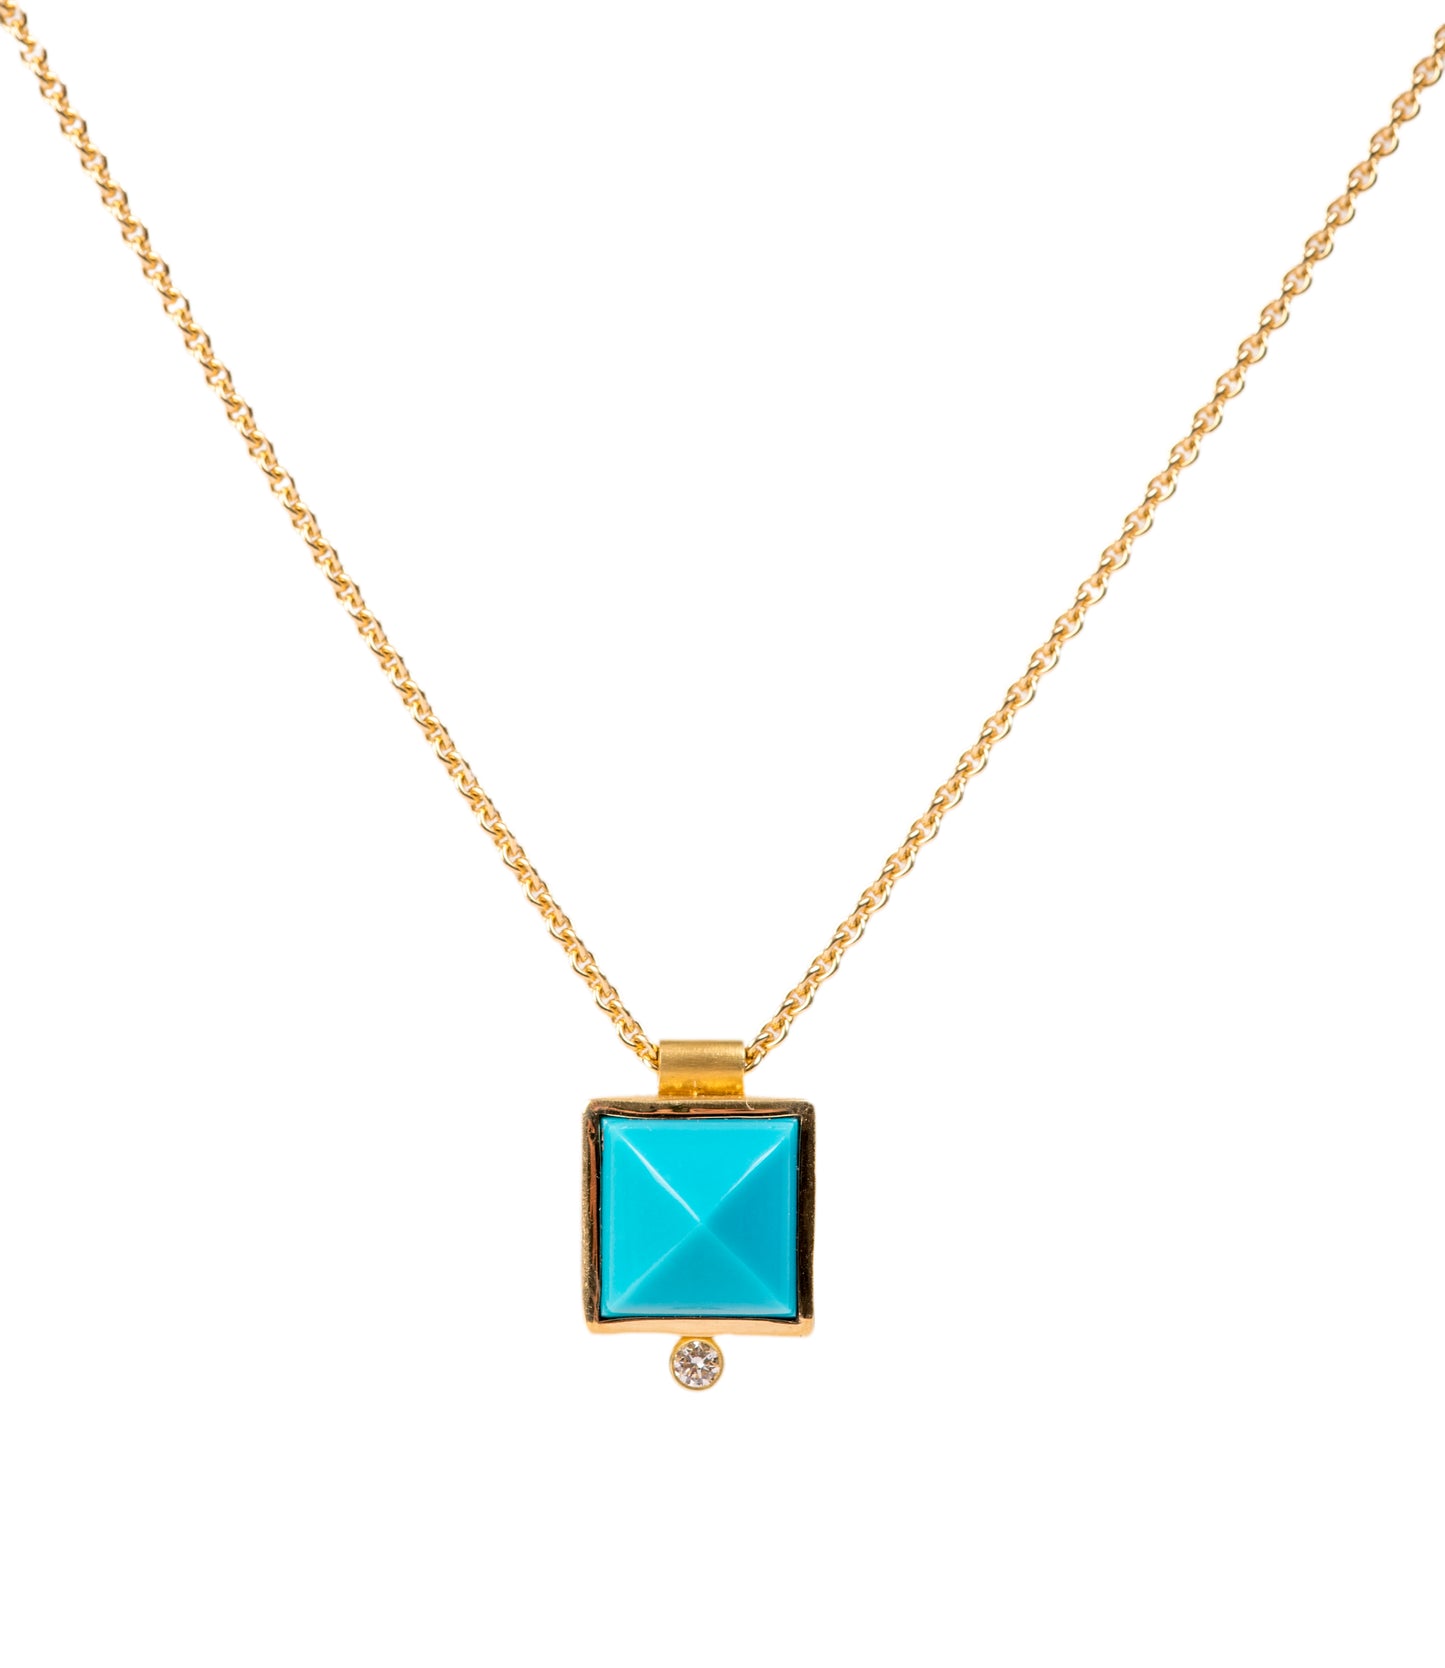 Turquoise Pyramid Necklace